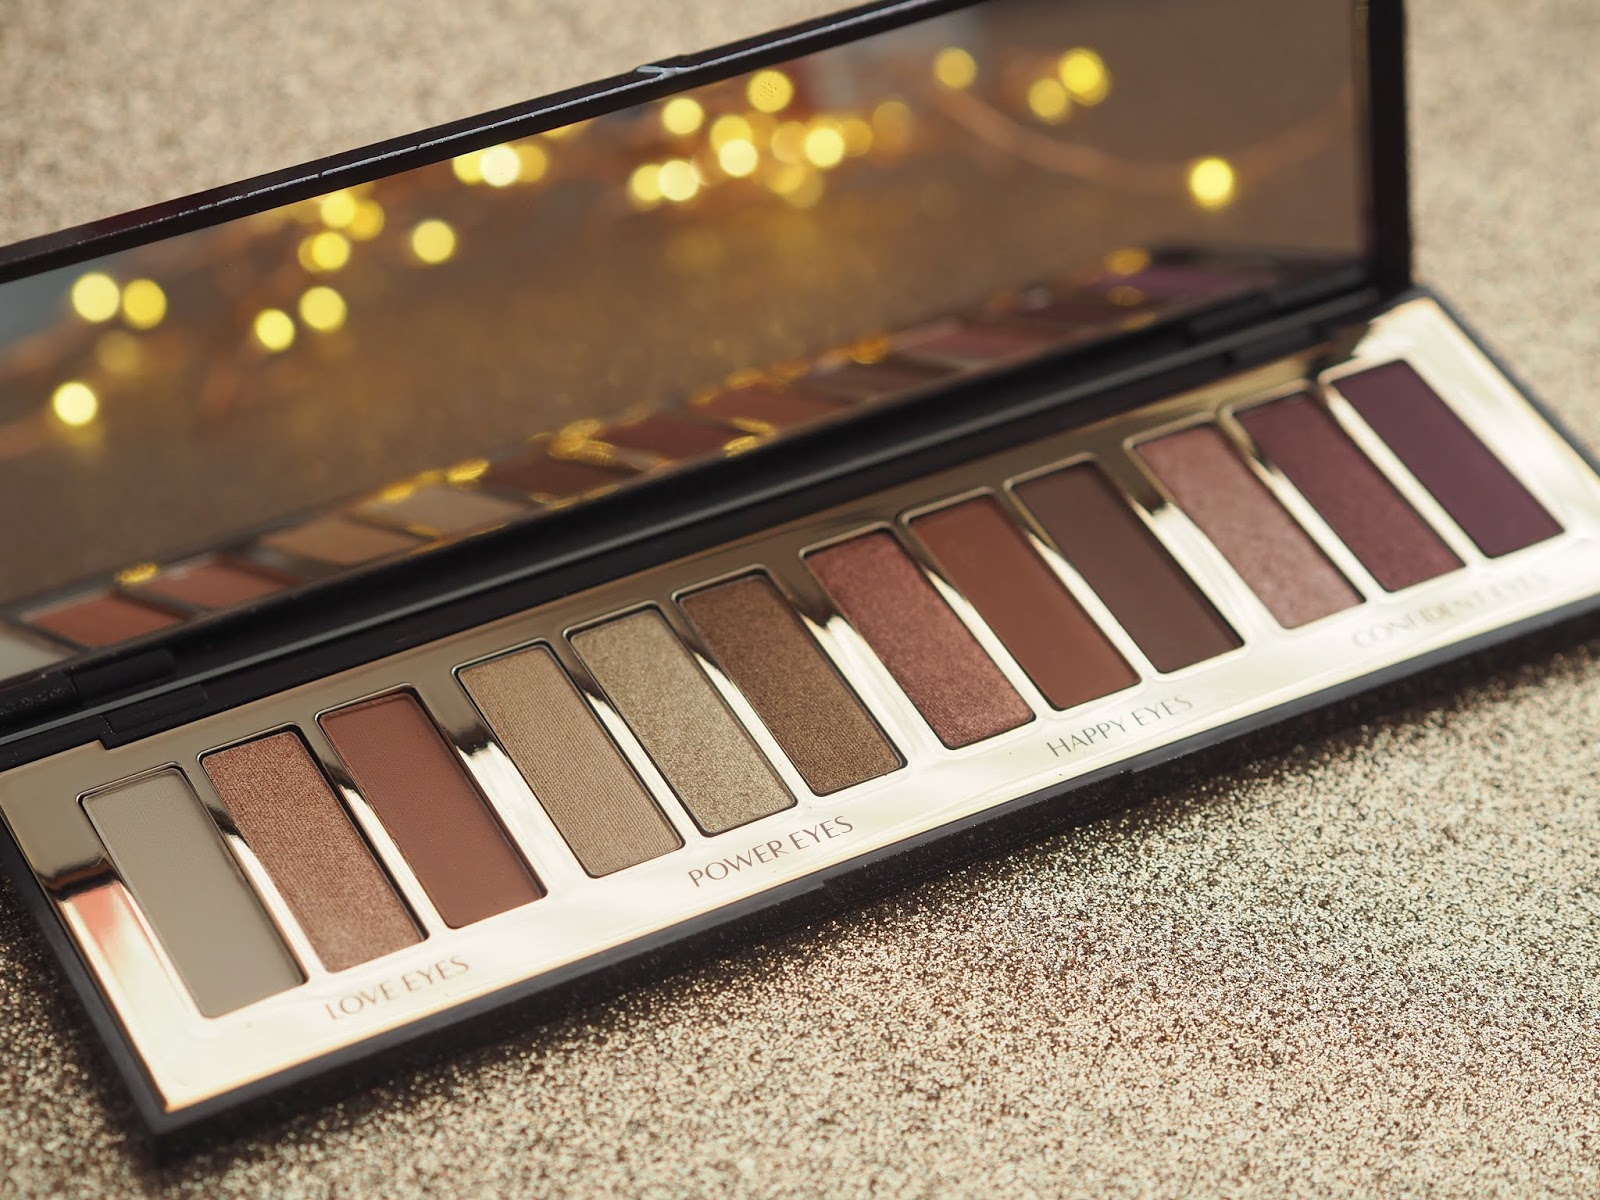 Charlotte Tilbury Stars In Your Eyes palette review, photos, swatches!